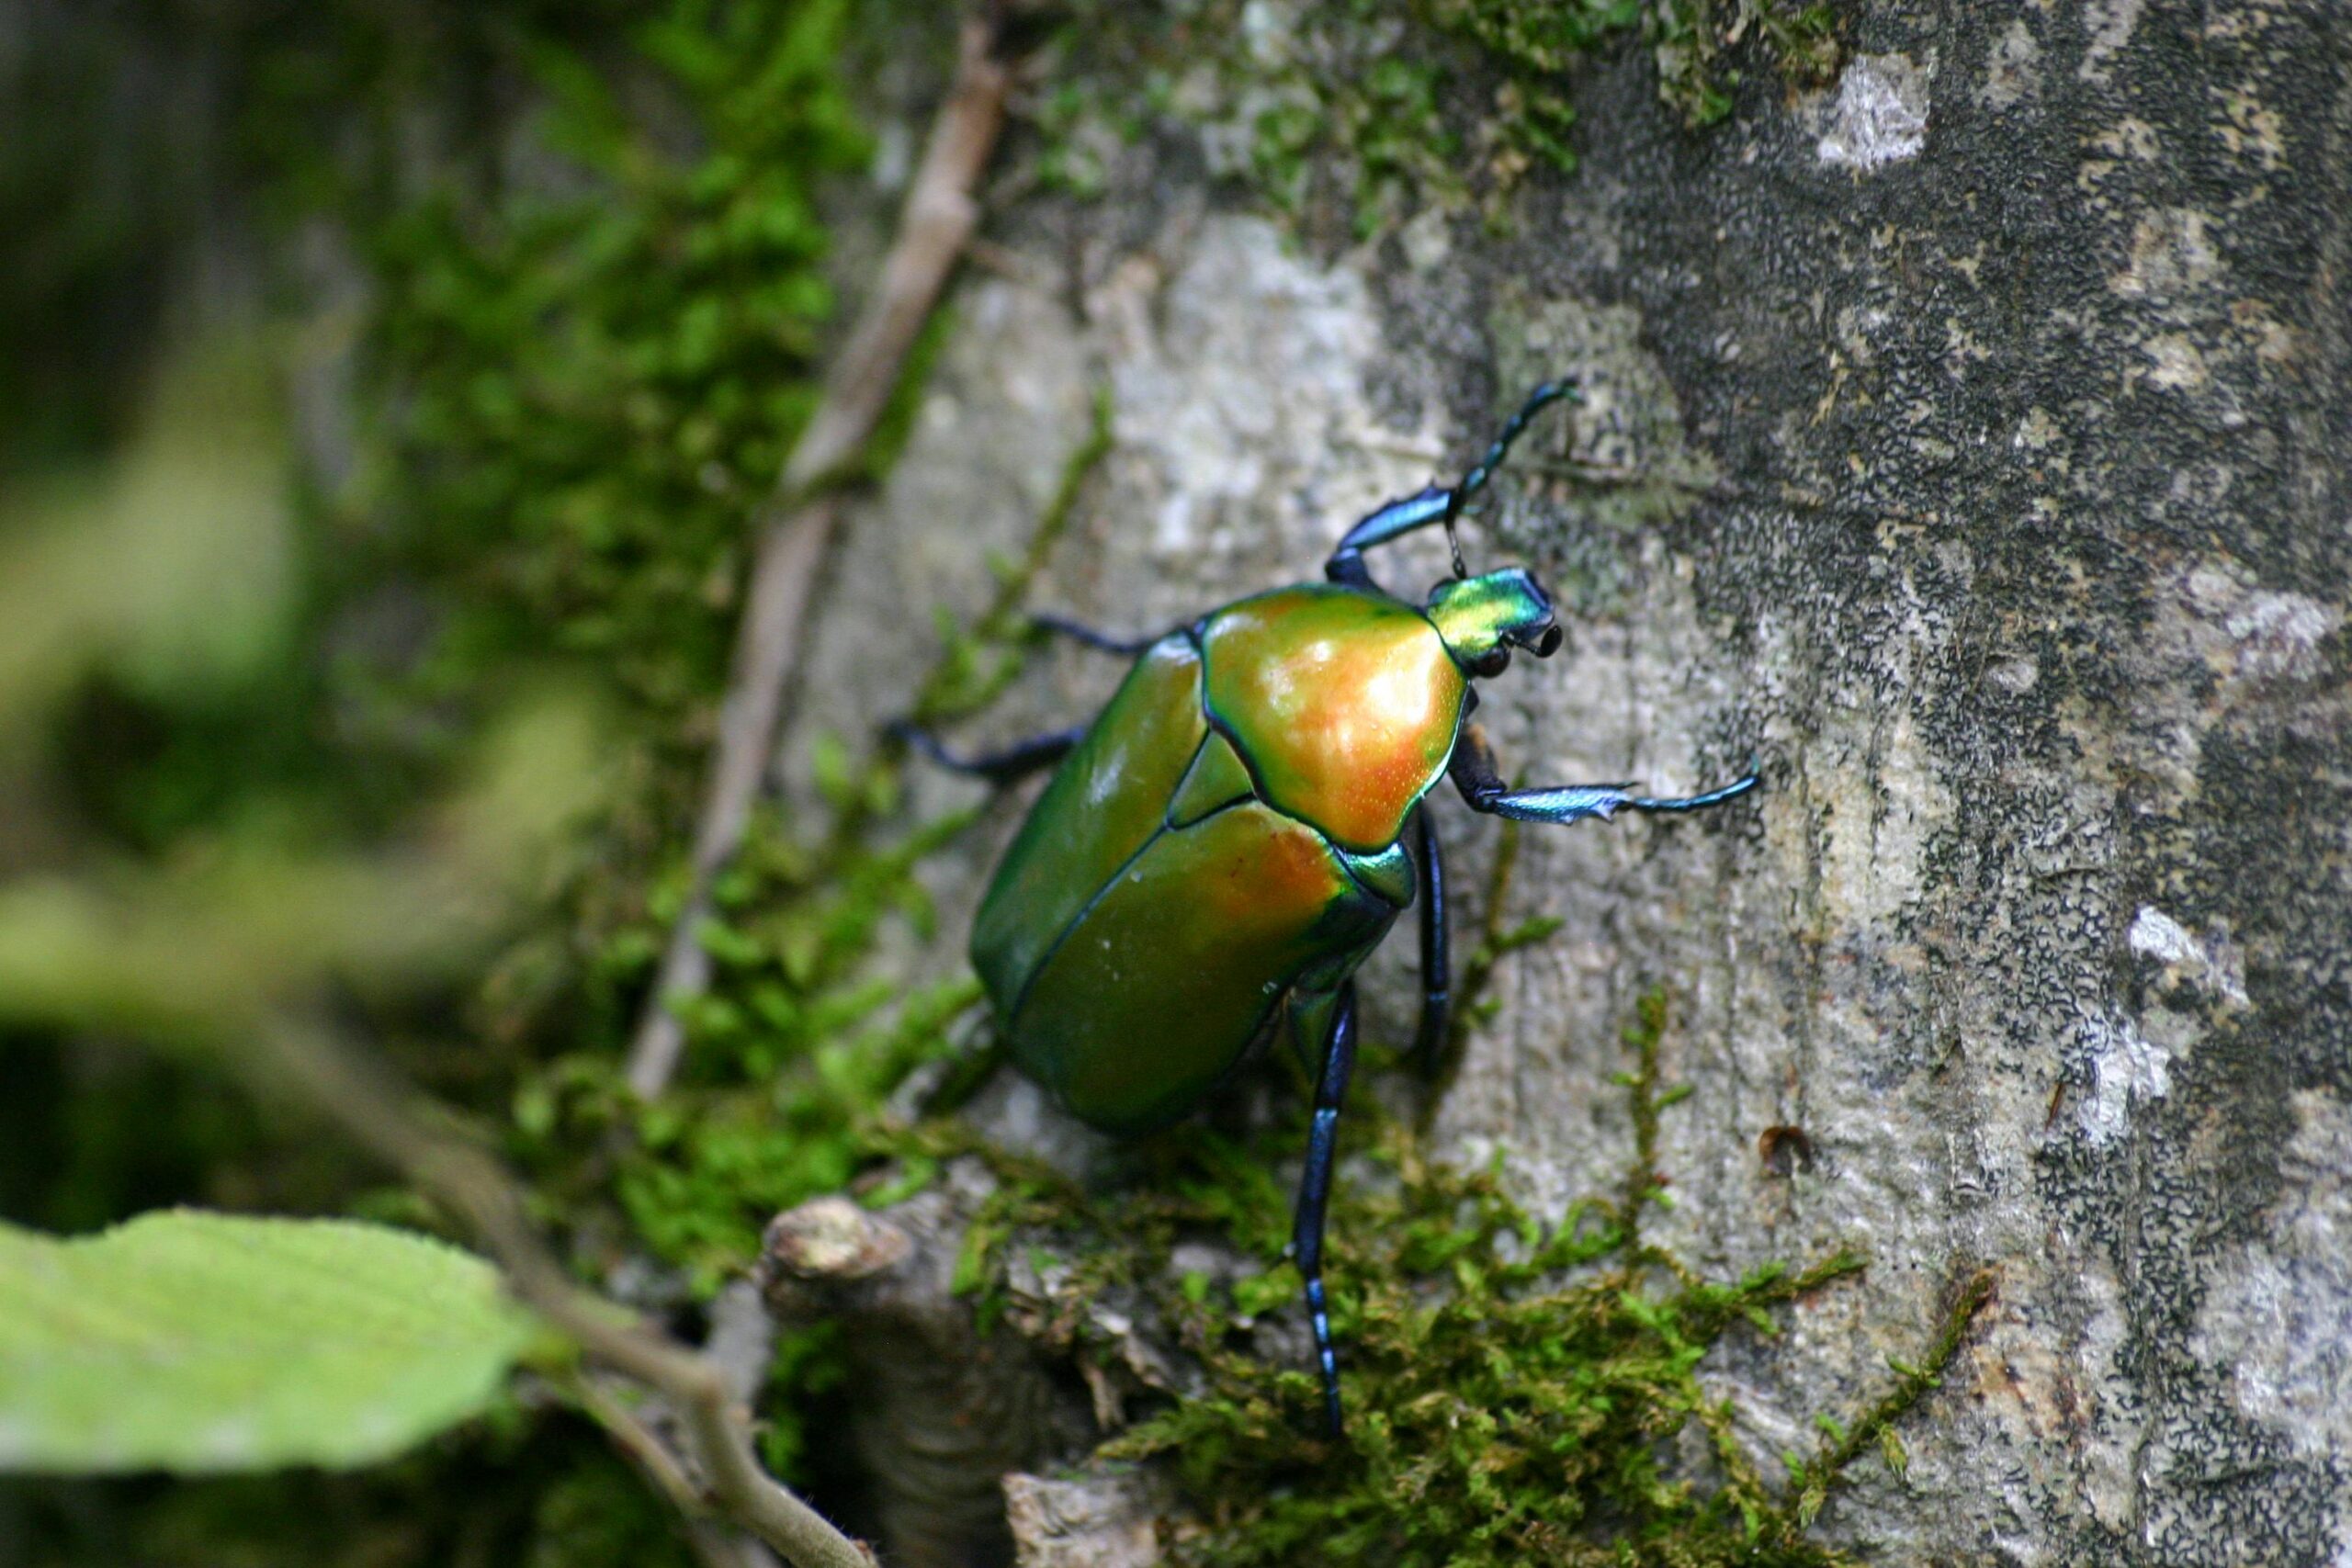 DIY Beetle Control: Effective Methods for Eliminating Beetles from Your Home